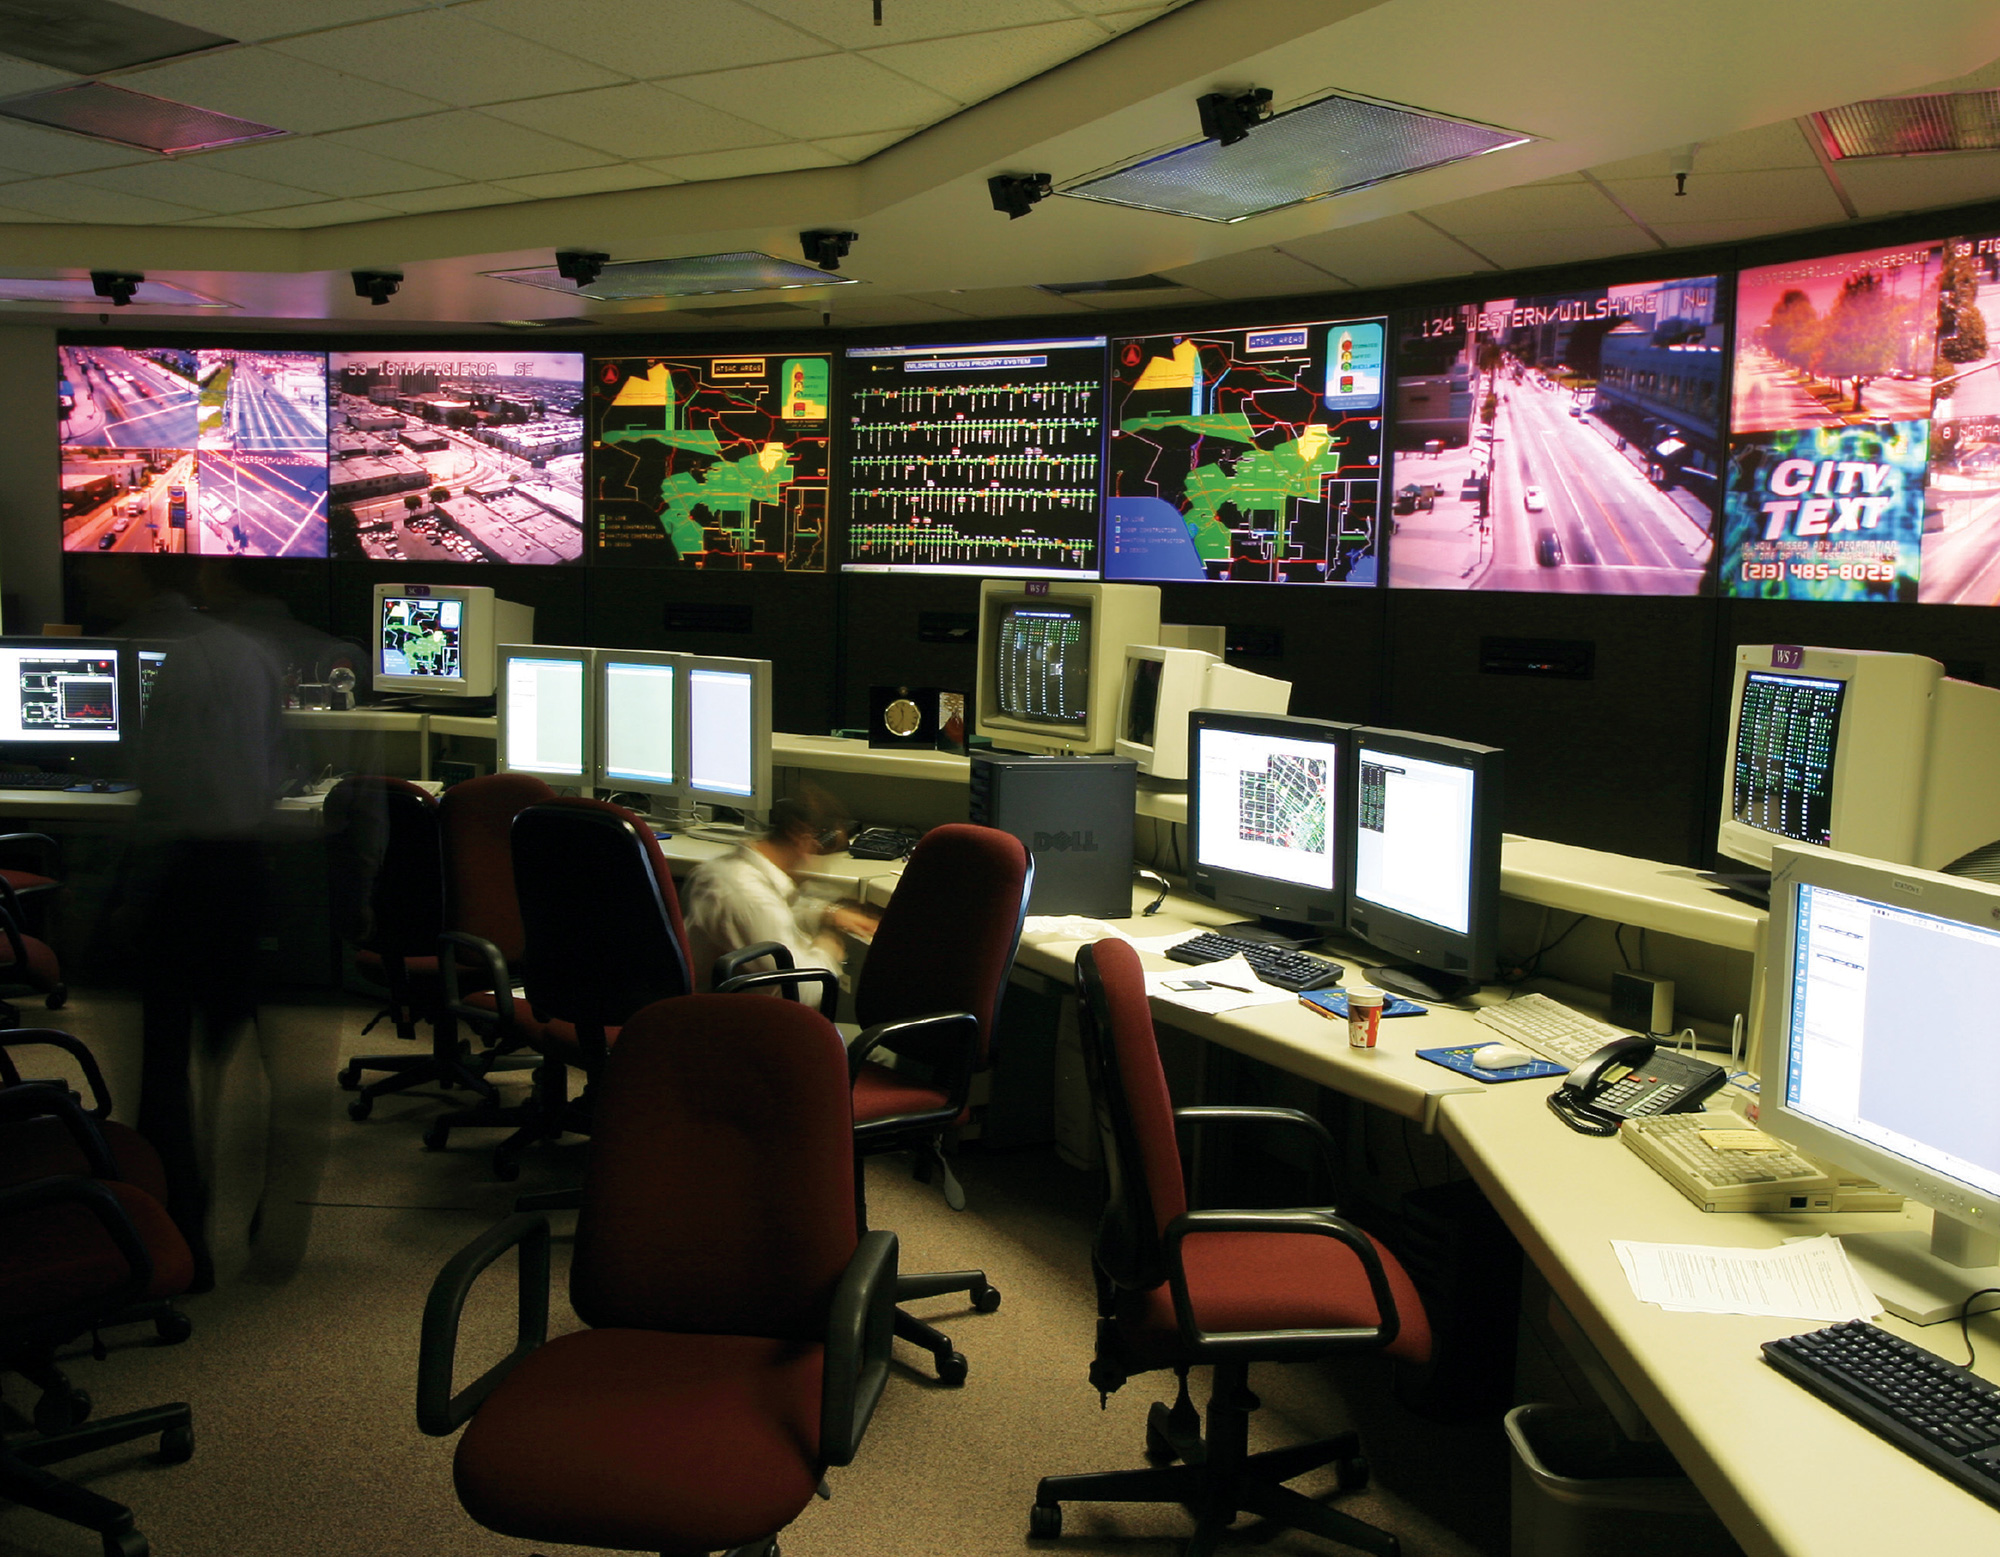 A 2005 photograph of a digital traffic control center in Los Angeles.